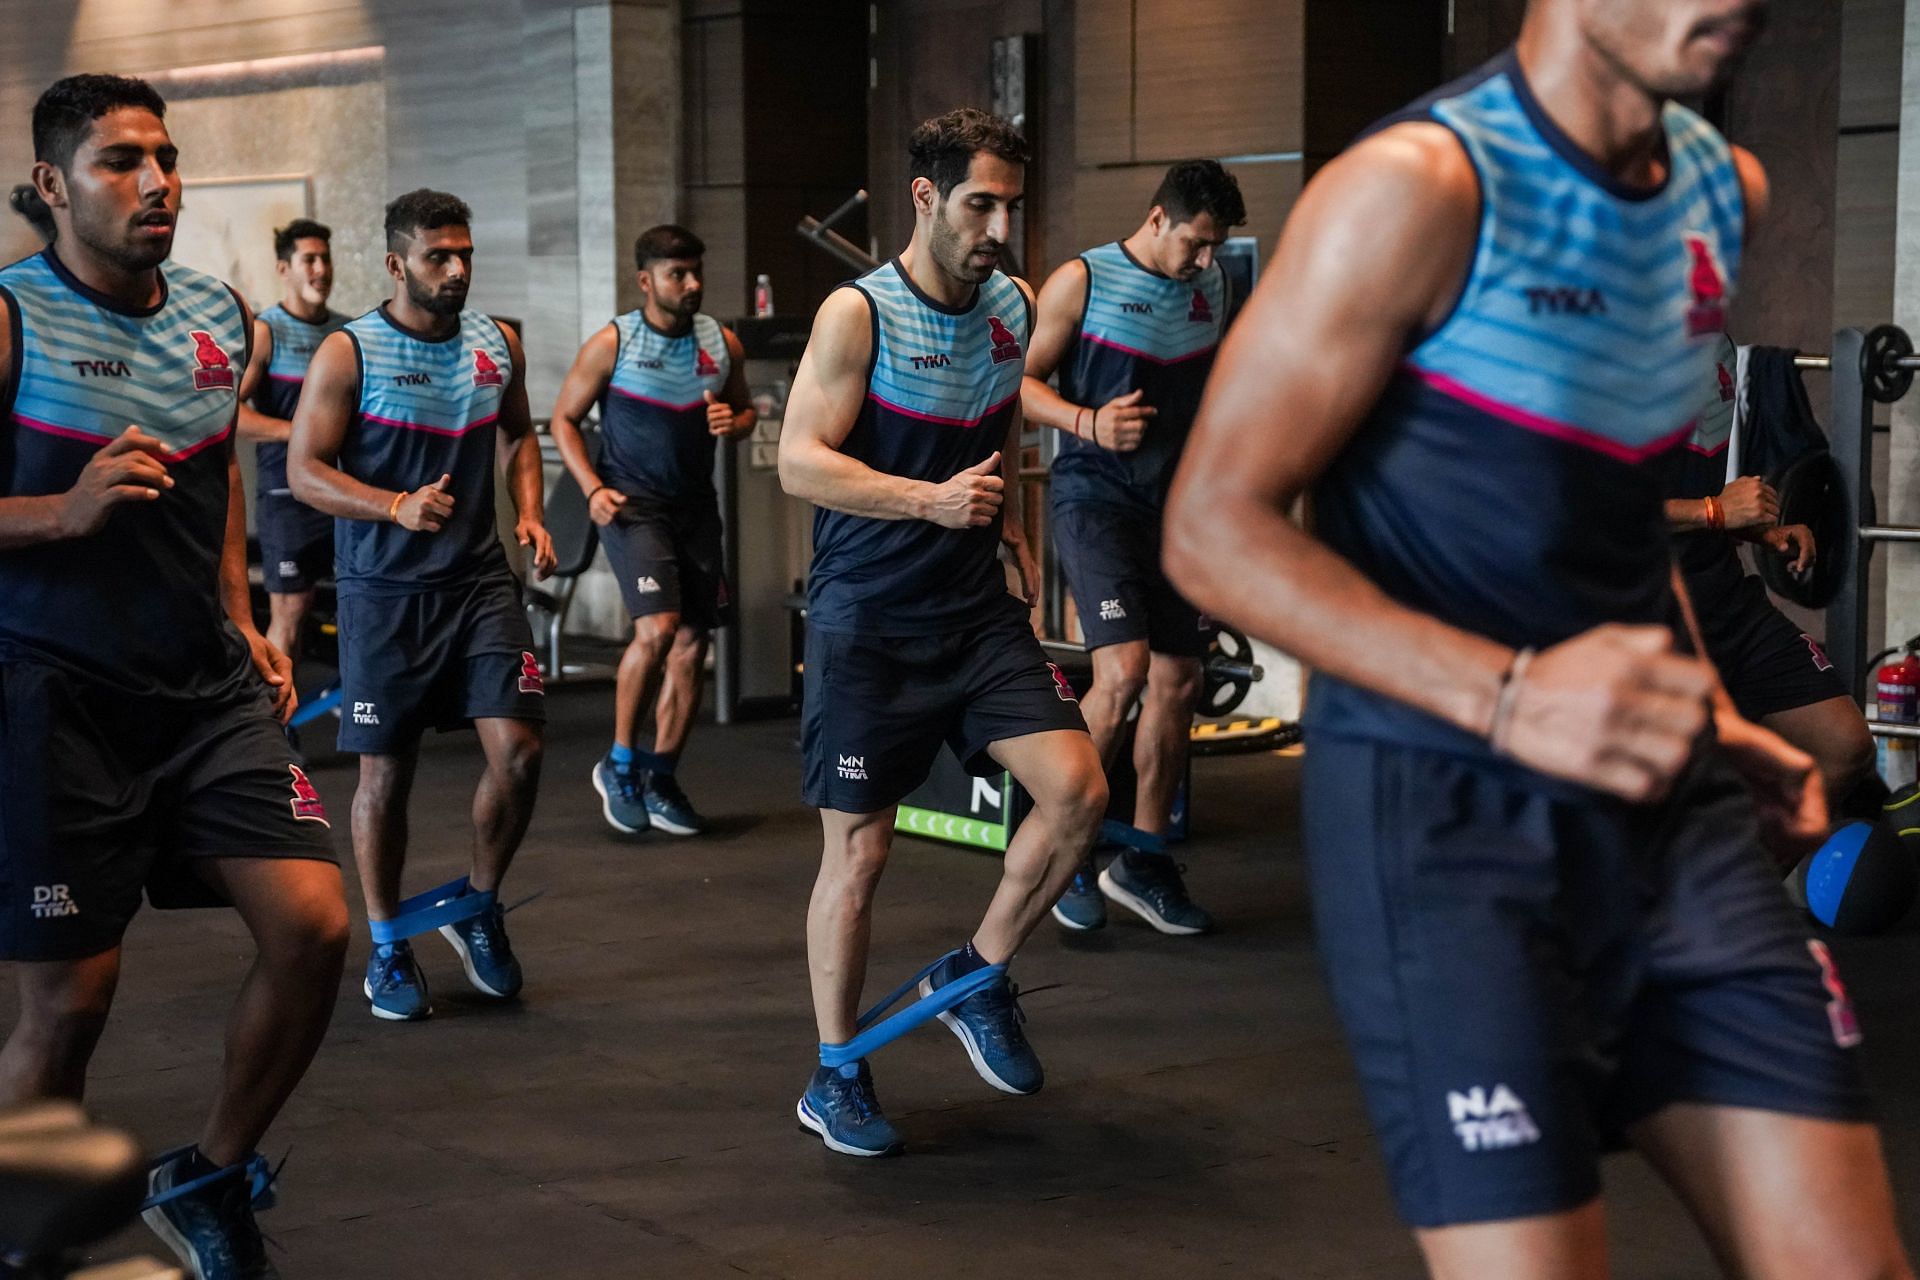 Jaipur Pink Panthers players train ahead of their upcoming PKL fixture against the Bengaluru Bulls - Image Courtesy: Jaipur Pink Panthers Twitter